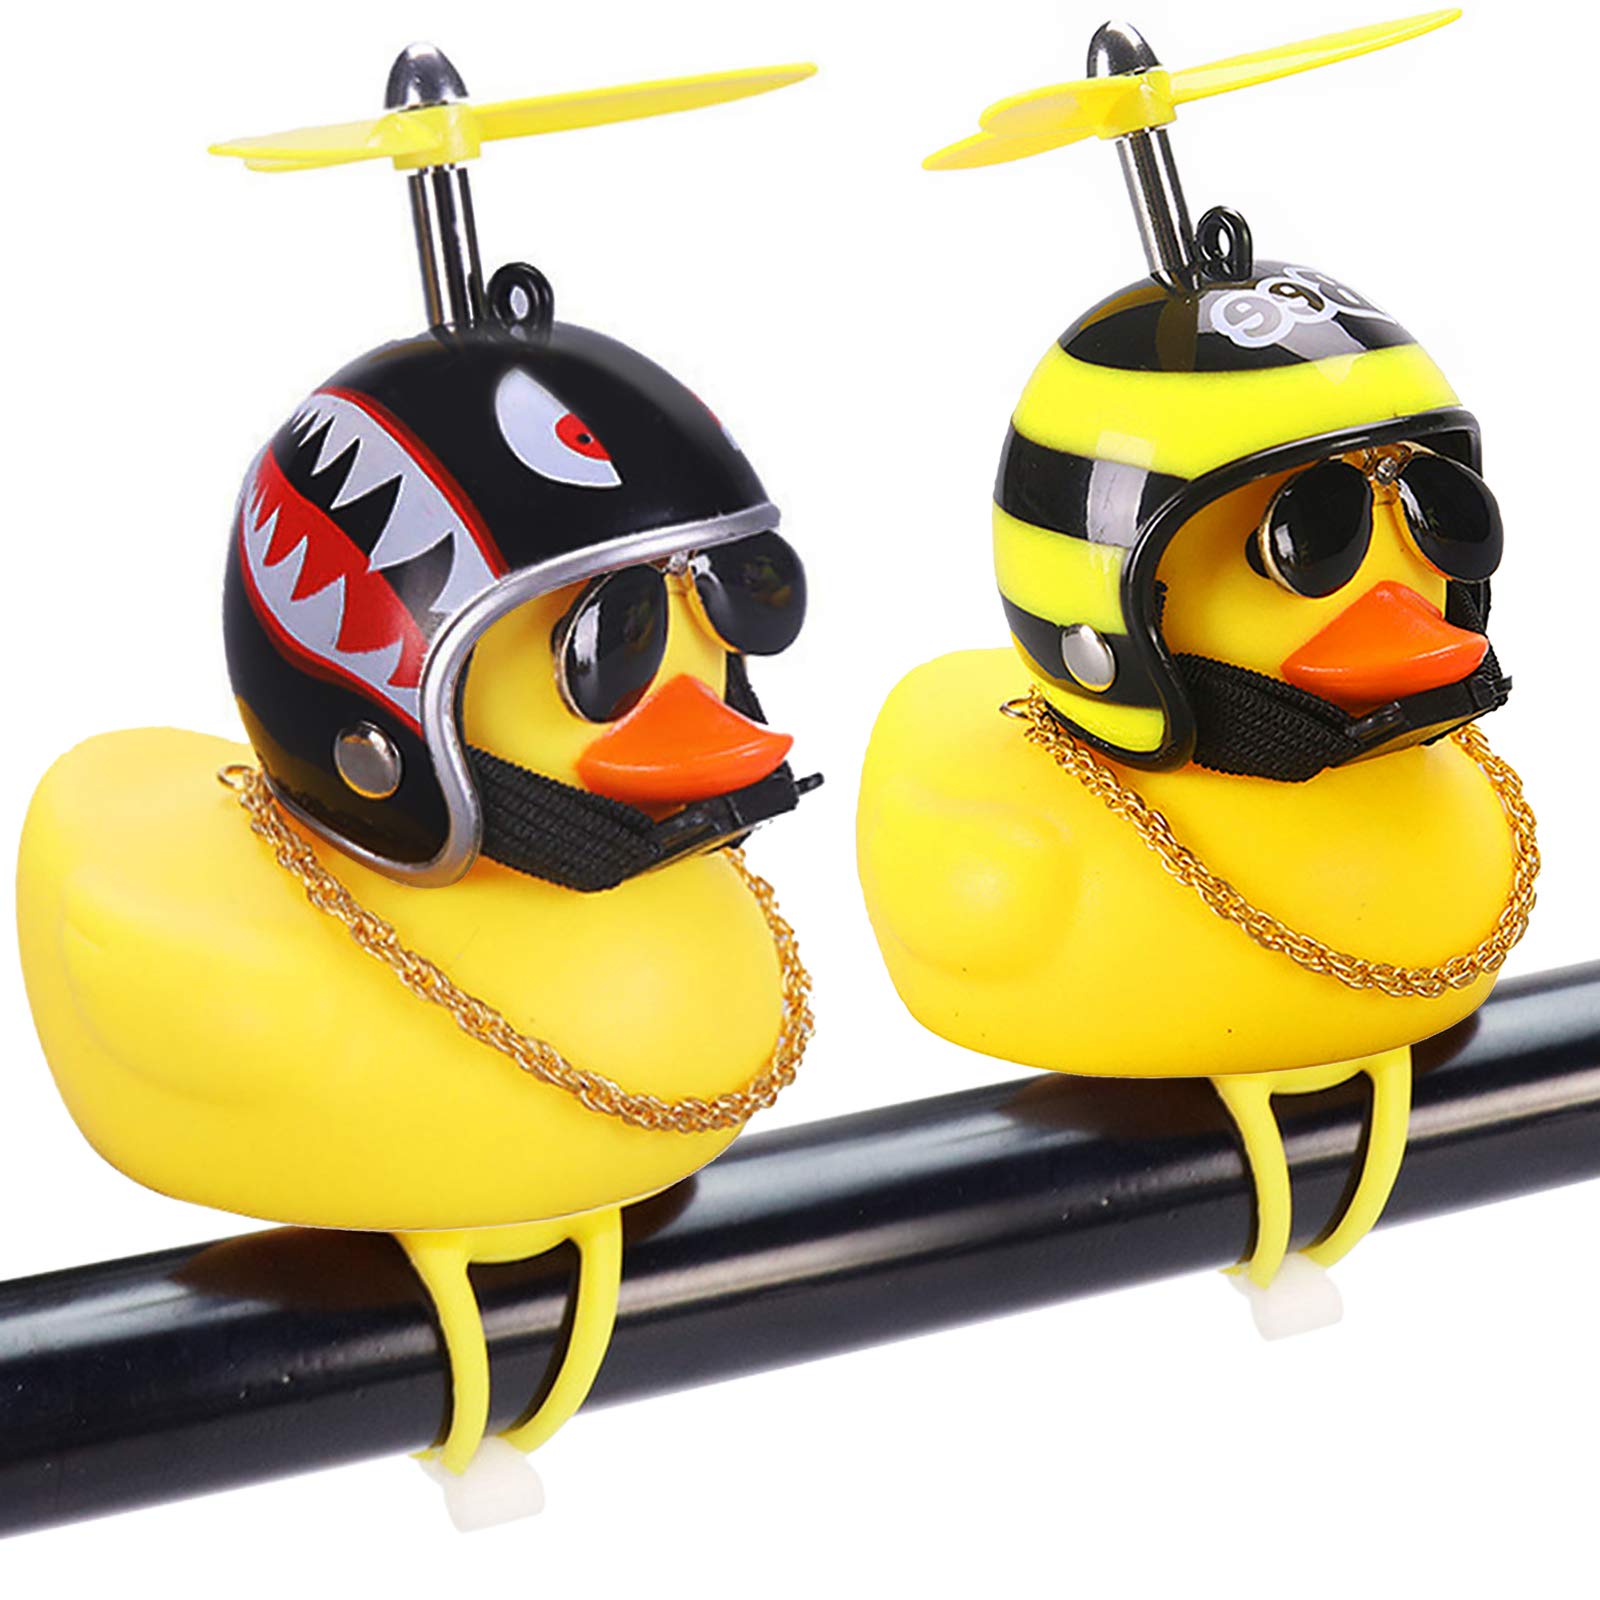 wonuu Rubber Duck Toy Car Ornaments Yellow Duck Car Dashboard Decorations  Cool Glasses Duck with Propeller Helmet